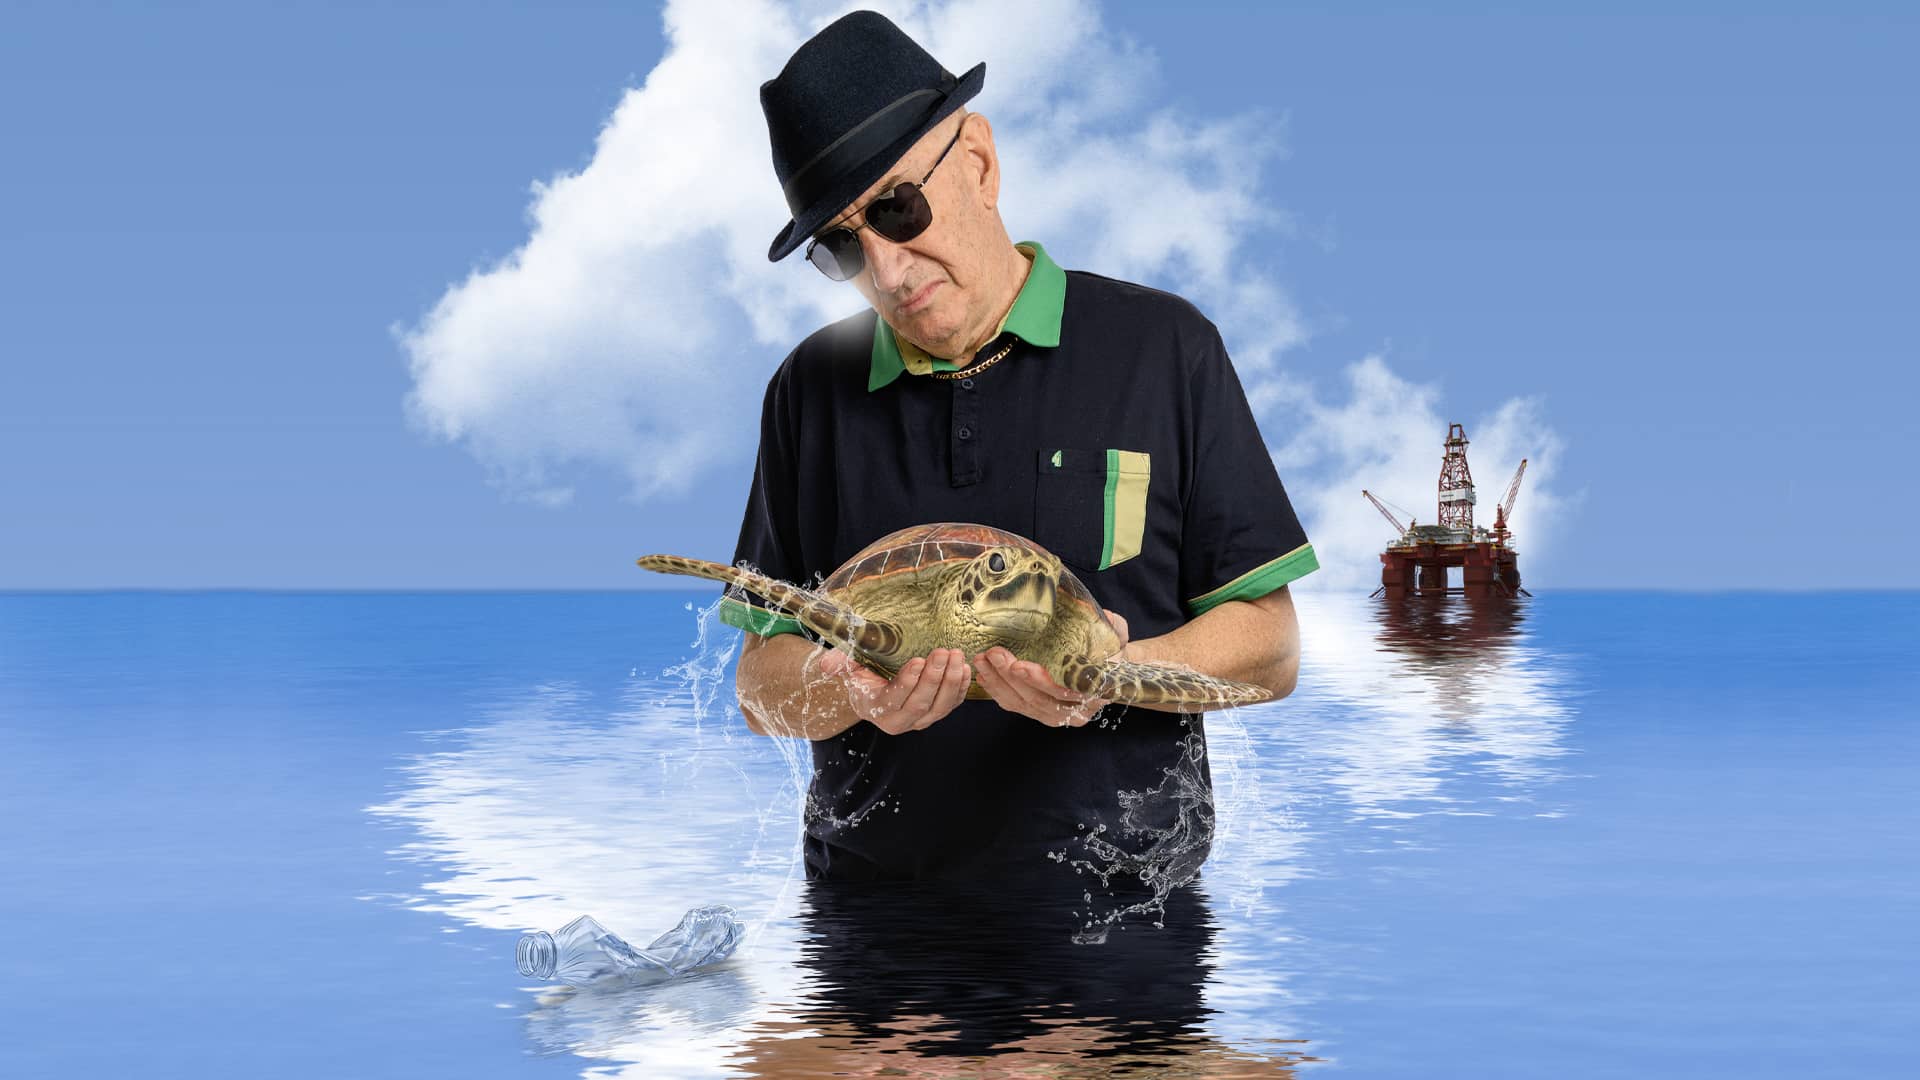 Simon Day as Dave Angel, Eco Warrior - A man in his sixties wears a black trilby hat, dark sunglasses and a black polo shirt with a green collar and sleeve edges. He is standing in the sea and holding a sea turtle. On his right there is a squashed empty plastic bottle floating on the water and behind him to his left is an oil rig in the distance. The sky in the background is blue with some white clouds and the sea water reflects the blue sky.